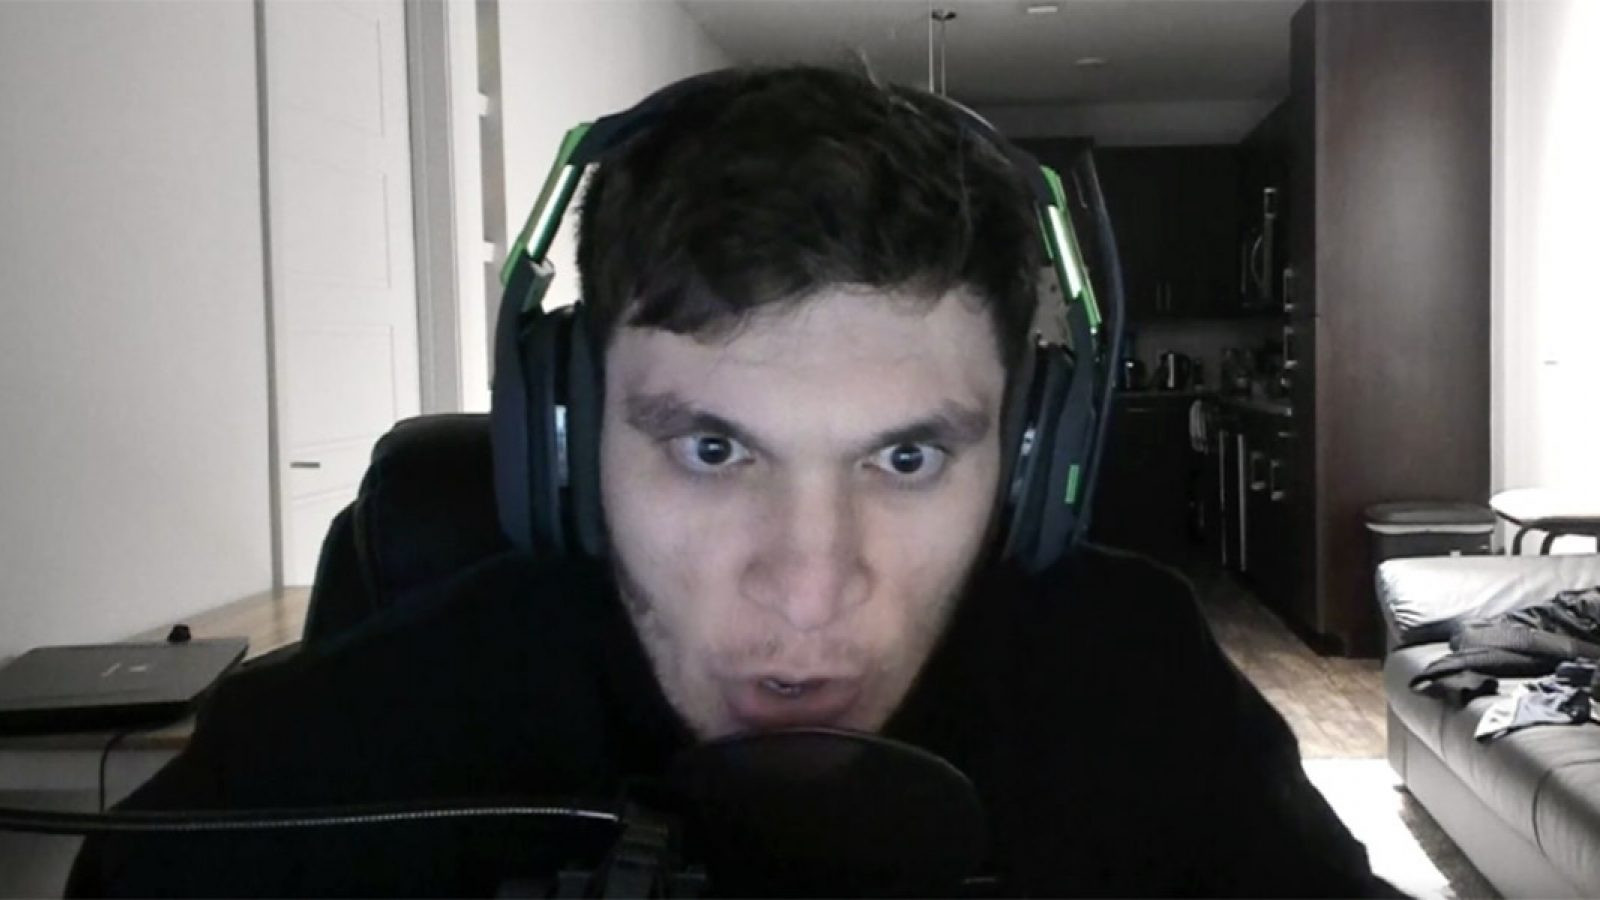 Hilarious Streamer Meltdowns - Trainwrecks Gets Banned From Twitch